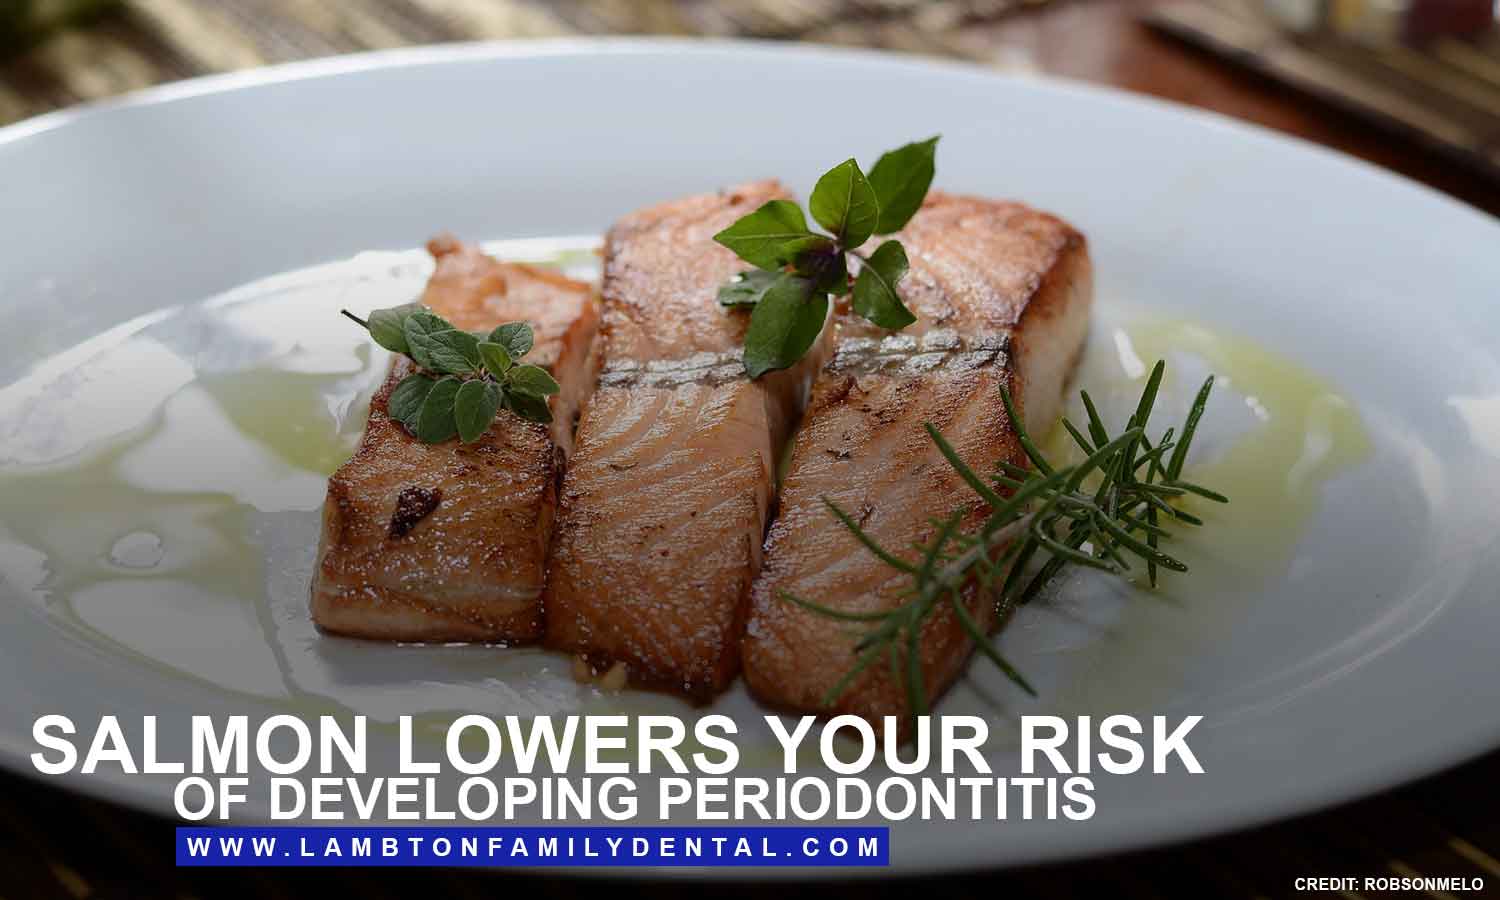 Salmon lowers your risk of developing periodontitis